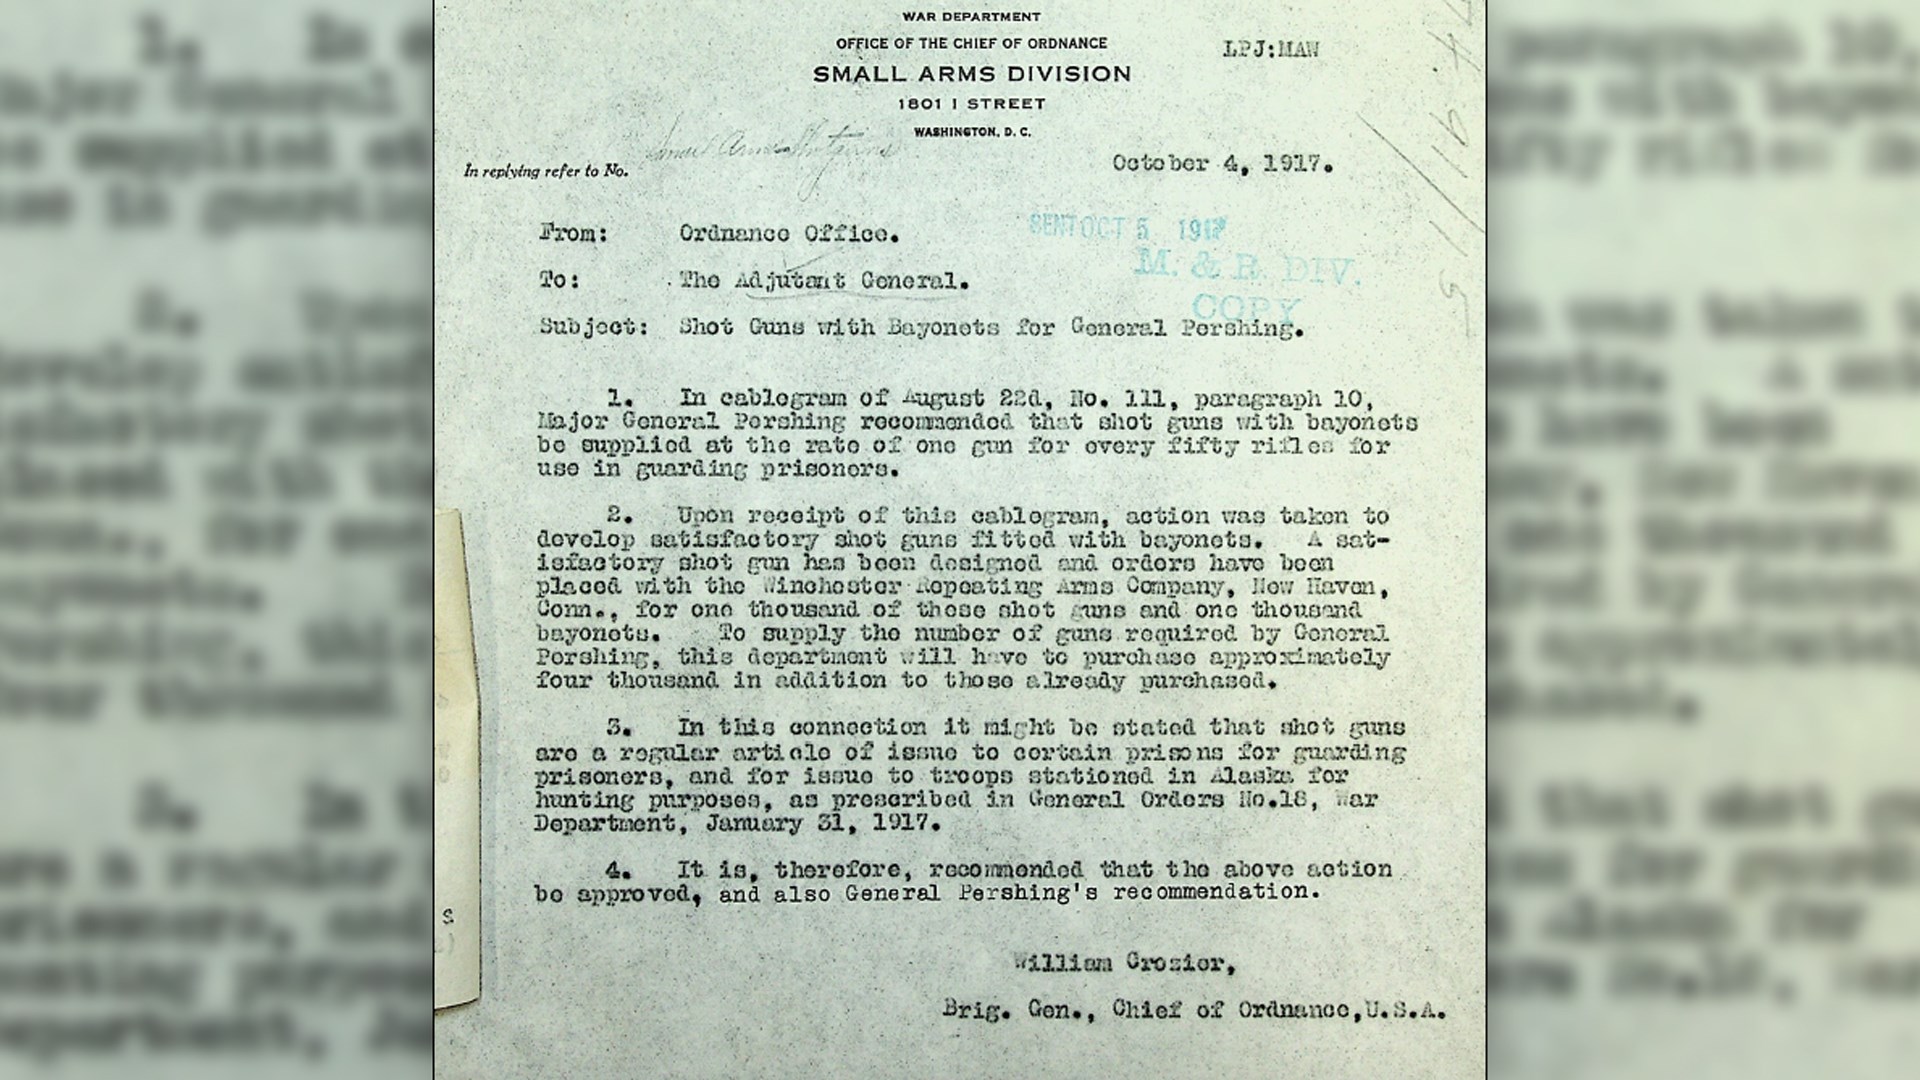 Brigadier General Crozier, the Army's Chief of Ordnance, references General Pershing's request for bayonet-capable shotguns for use in guarding prisoners, and reports on their efforts to develop a suitable weapon. He also notes previous military use of shotguns for special purposes. Document courtesy of Archival Research Group.